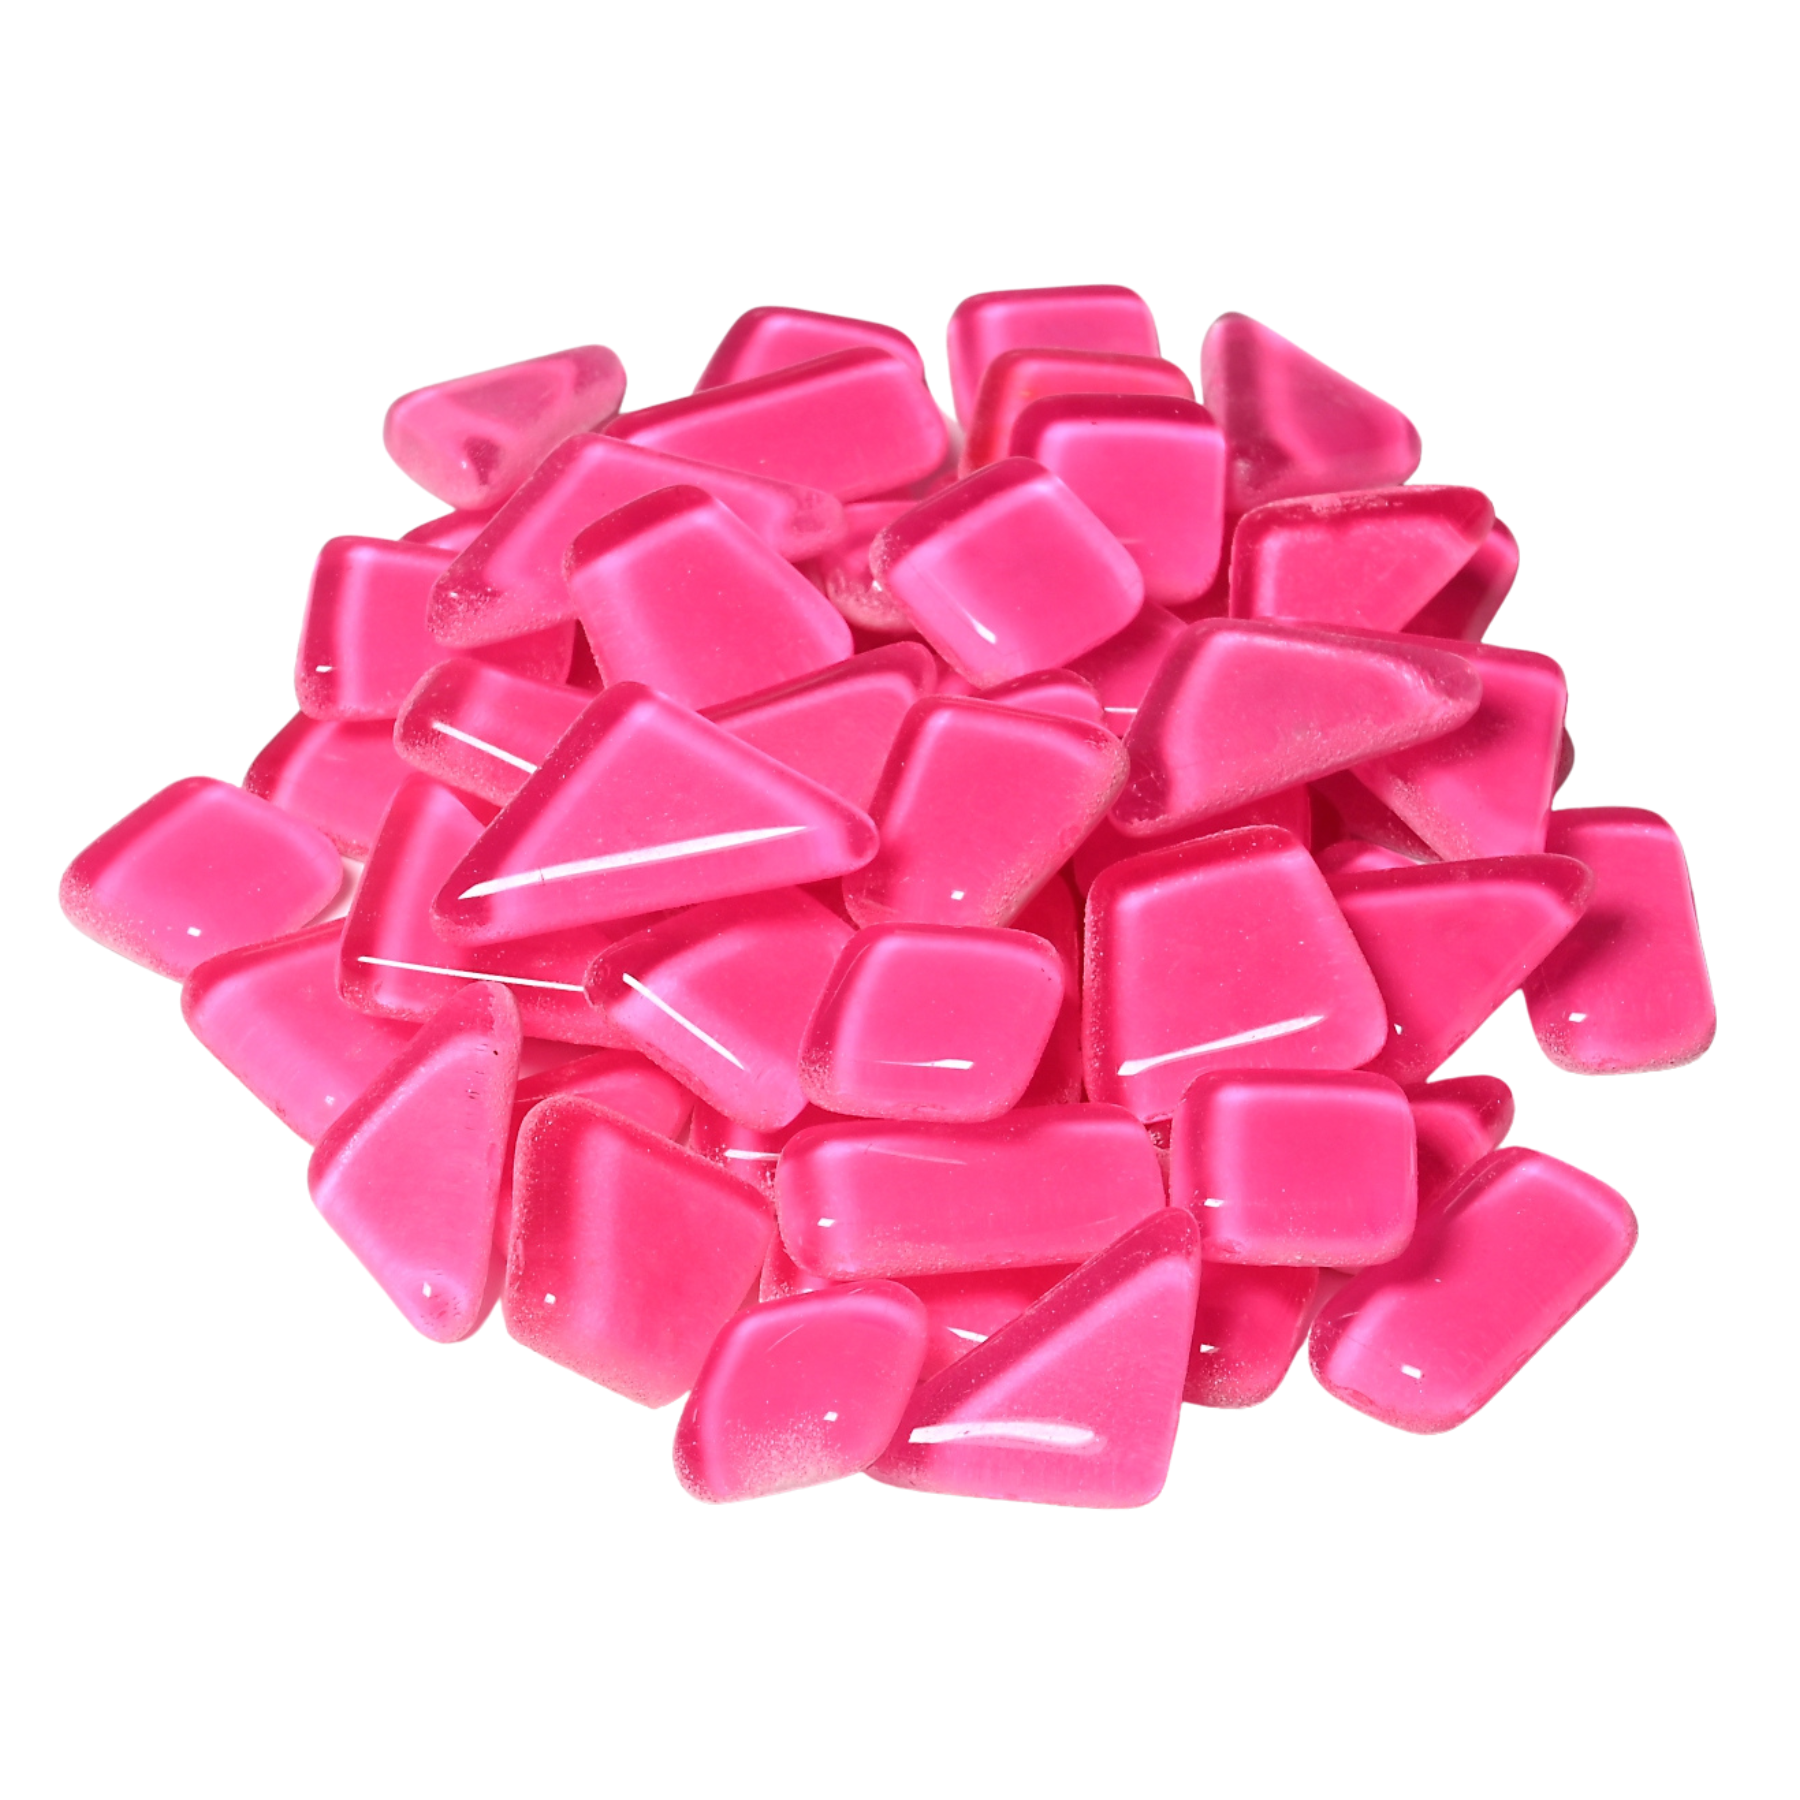 Glow In The Dark Soft Glass Puzzles - Pink